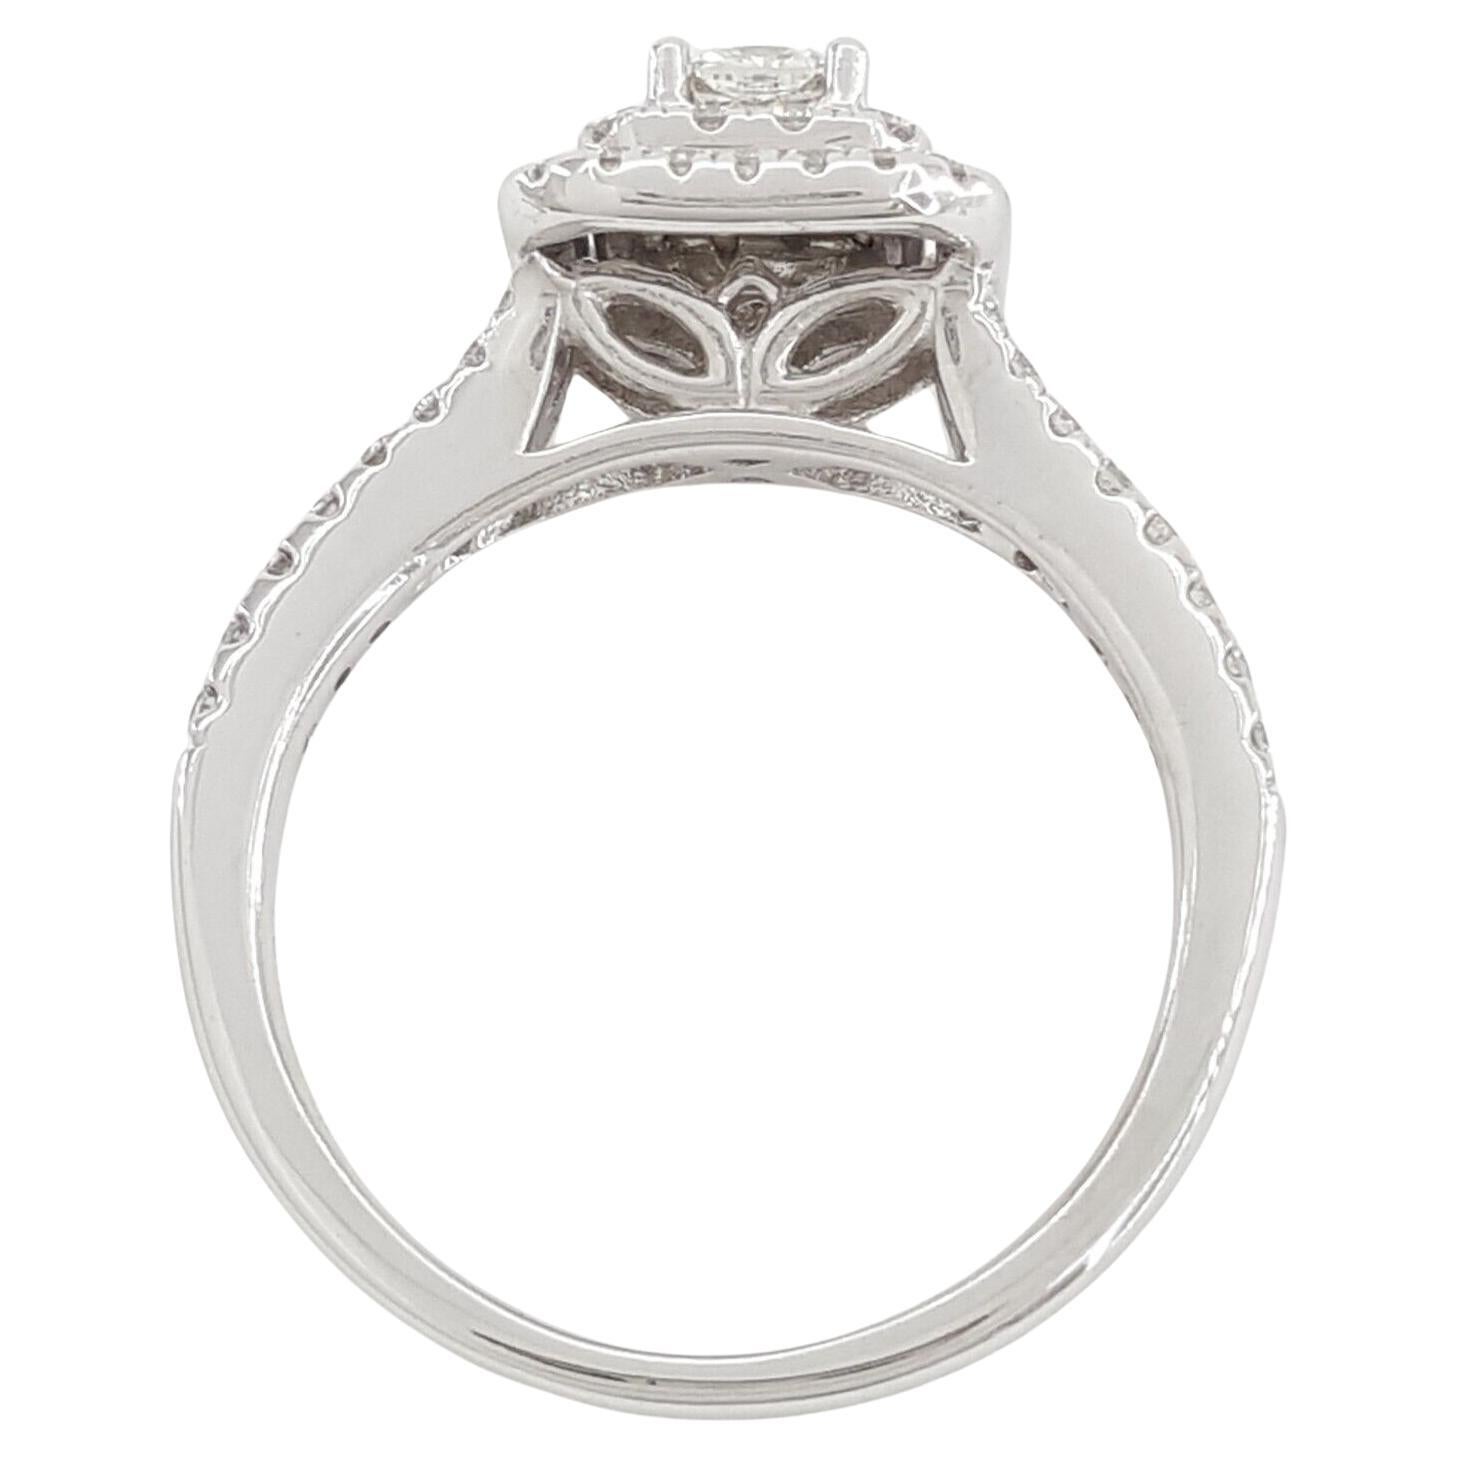 Weighing 3.1 grams and sized at 5, this 14k White Gold Engagement Ring showcases a Total Weight of 3/4 carats with a Cushion Cut Diamond and a Double Halo design. The central stone is a Natural Cut-Cornered Square Brilliant Cut Diamond, featuring